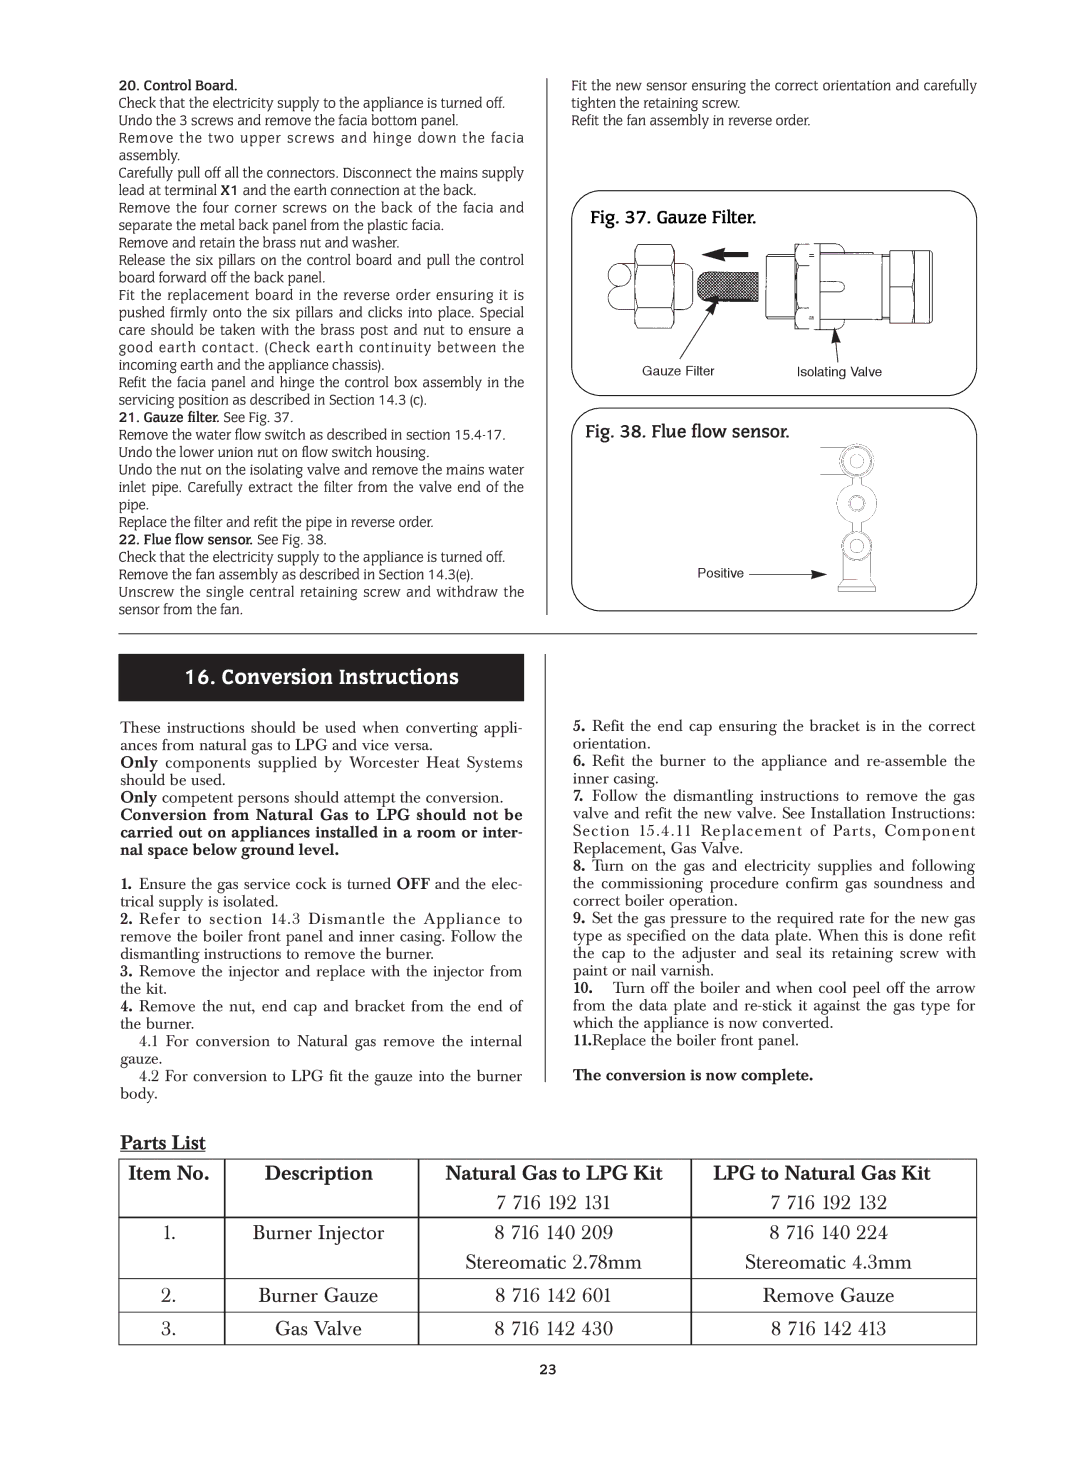 Bosch Appliances 24I RSF manual Conversion Instructions, Gauze Filter 